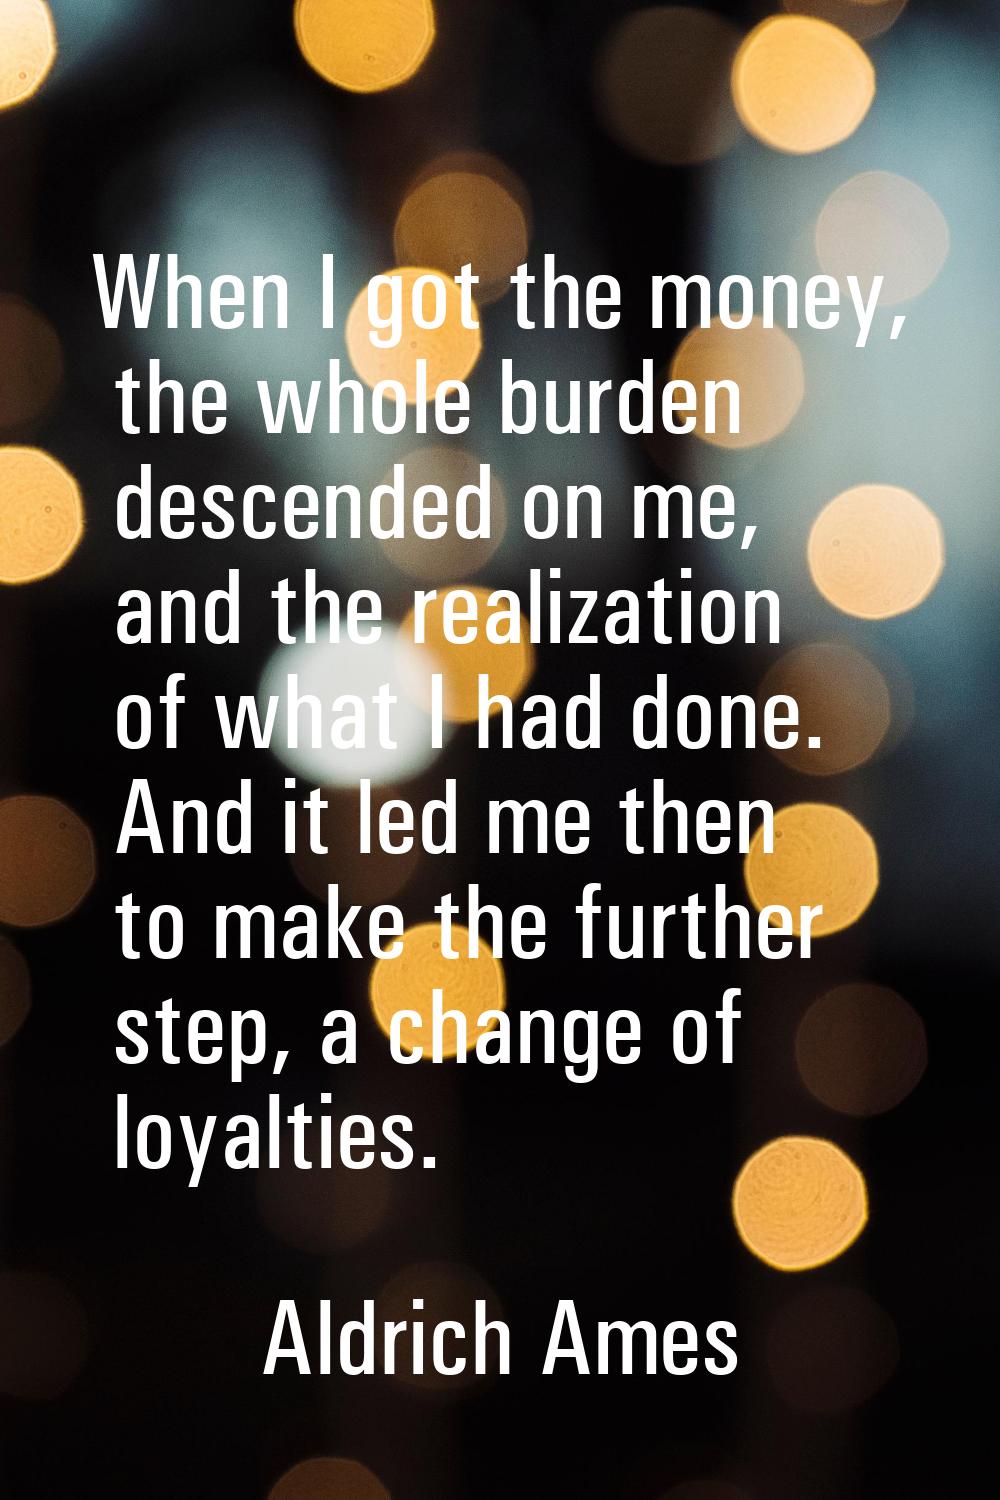 When I got the money, the whole burden descended on me, and the realization of what I had done. And